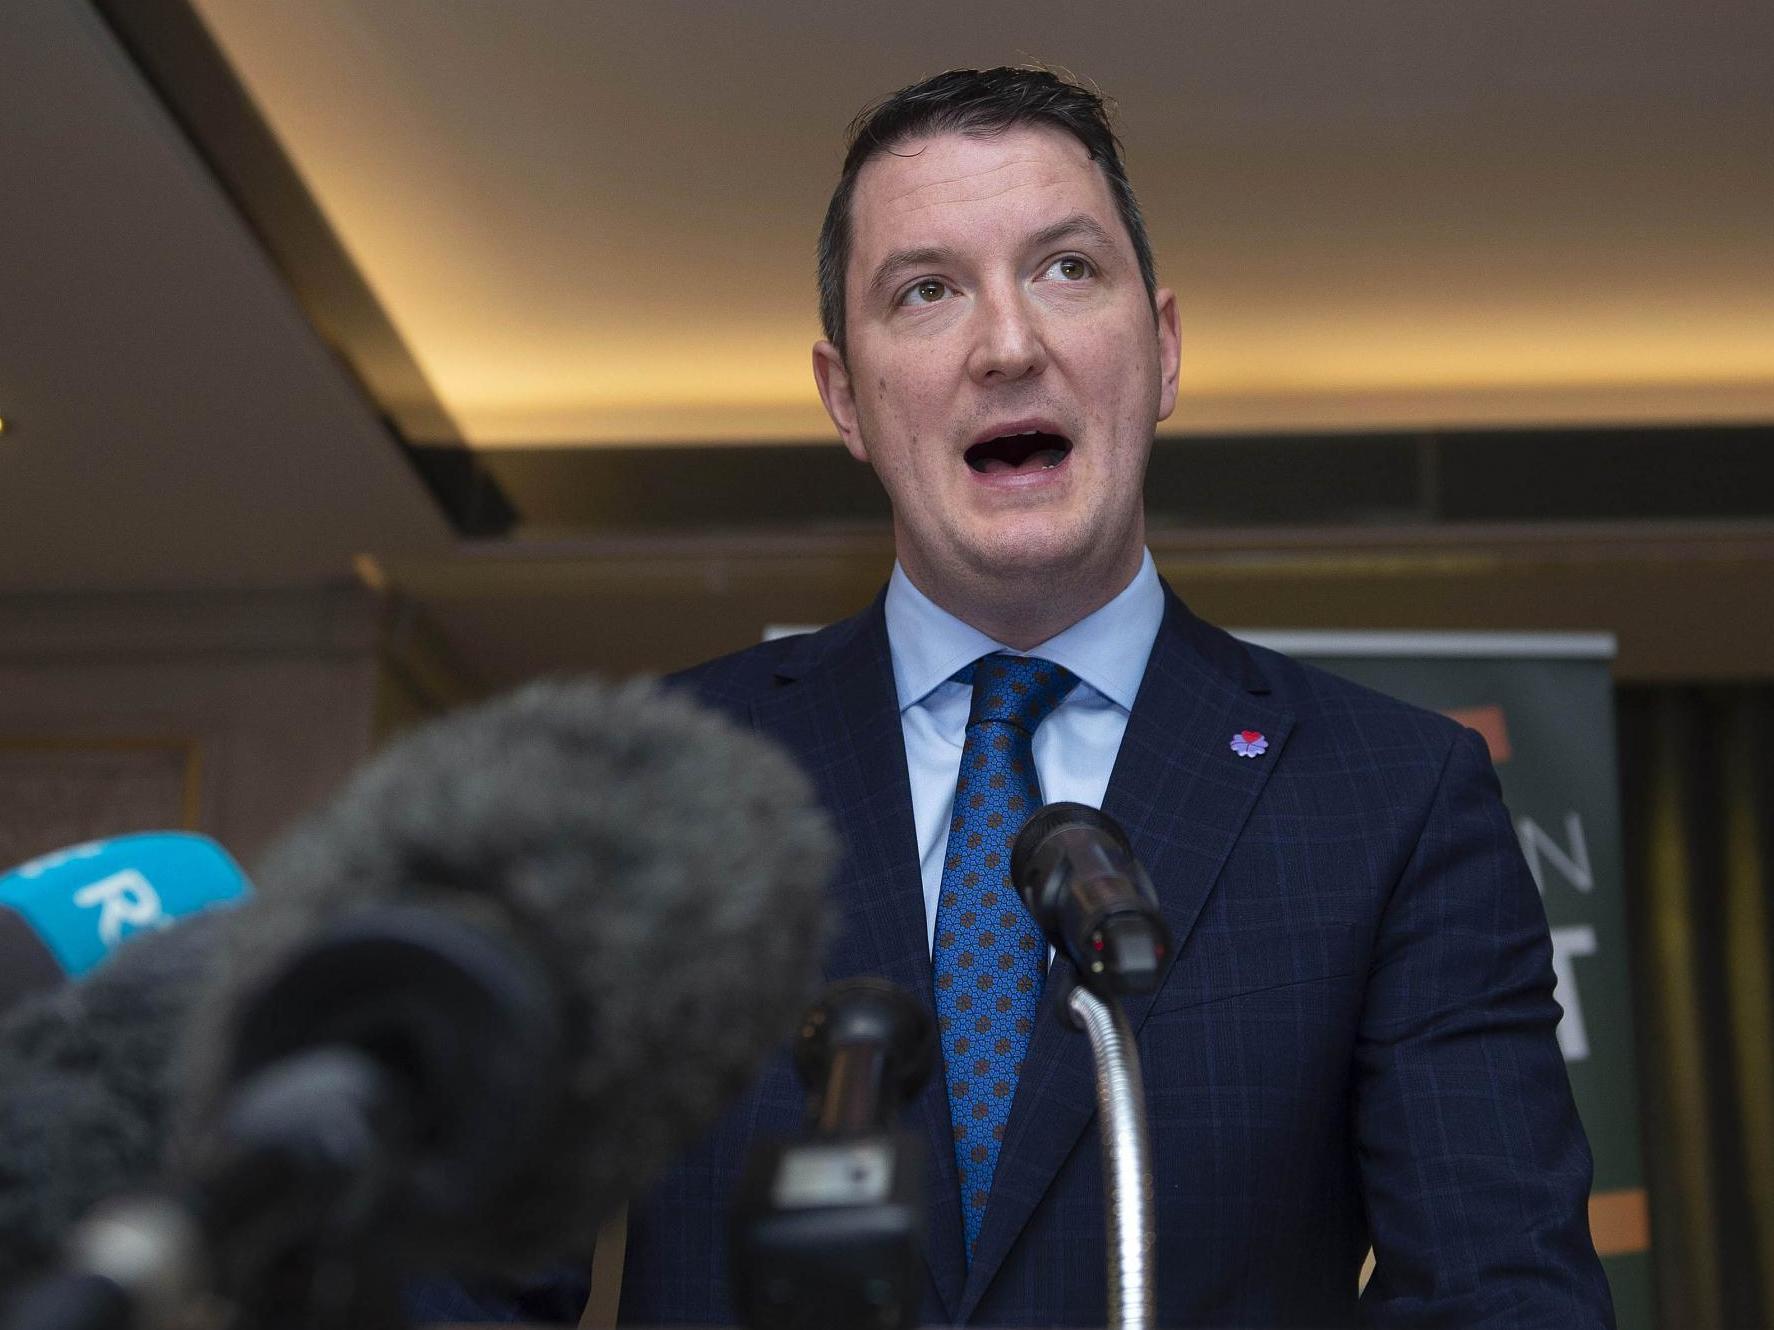 John Finucane has apologised and said he is 'deeply embarrassed'